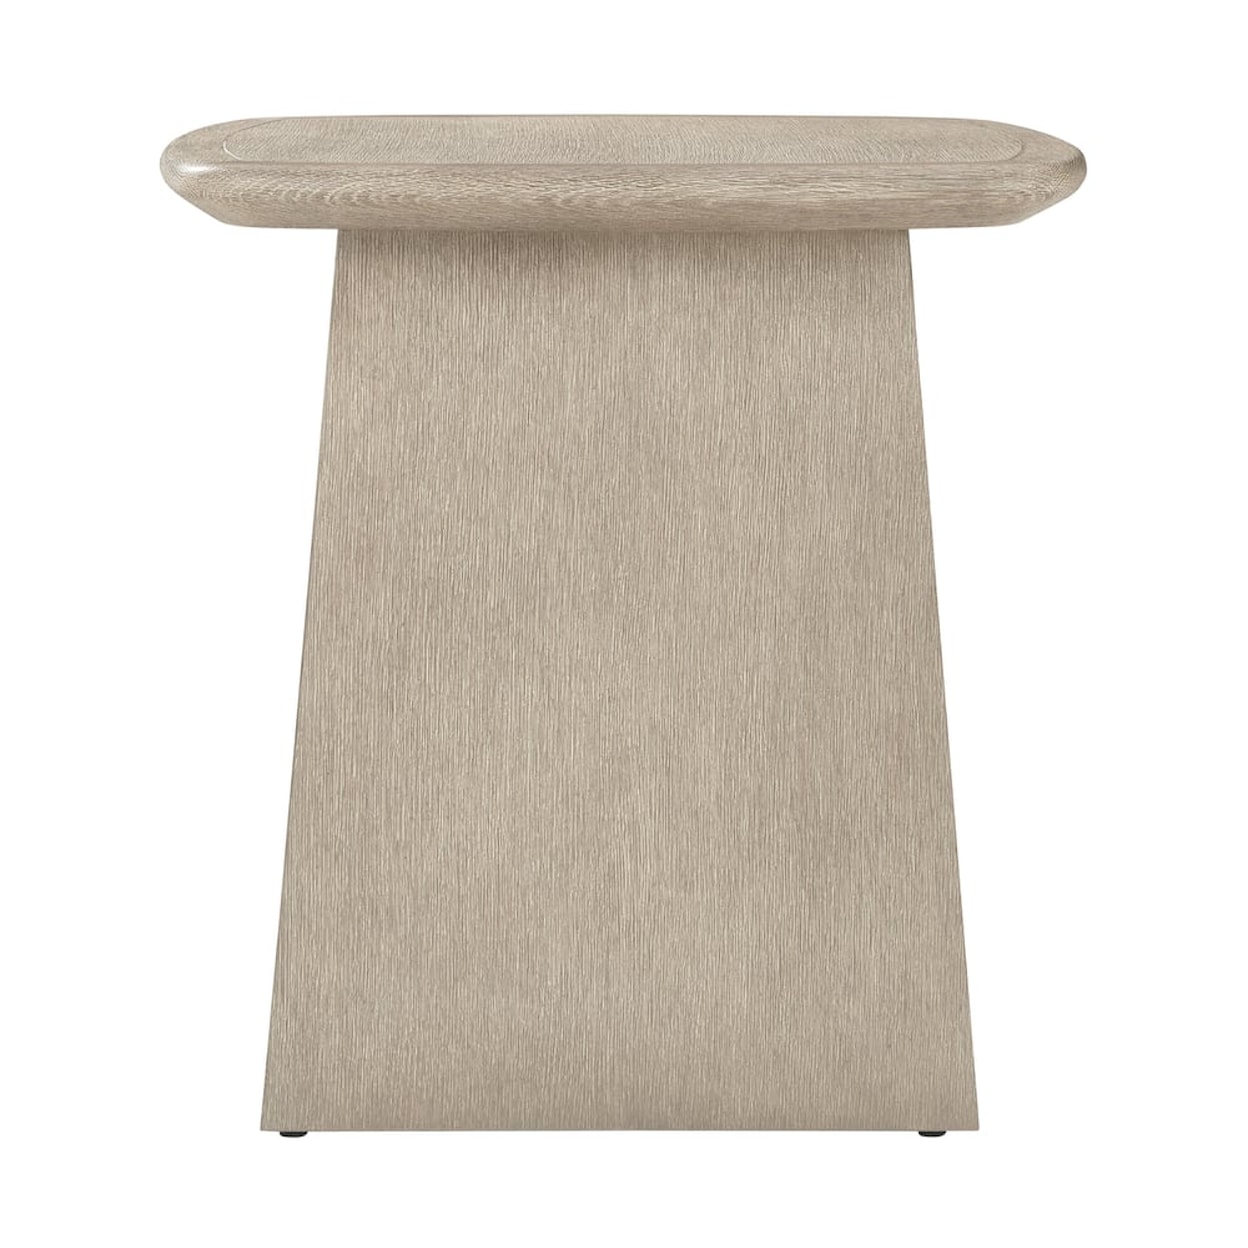 Theodore Alexander Repose Square Side Table 